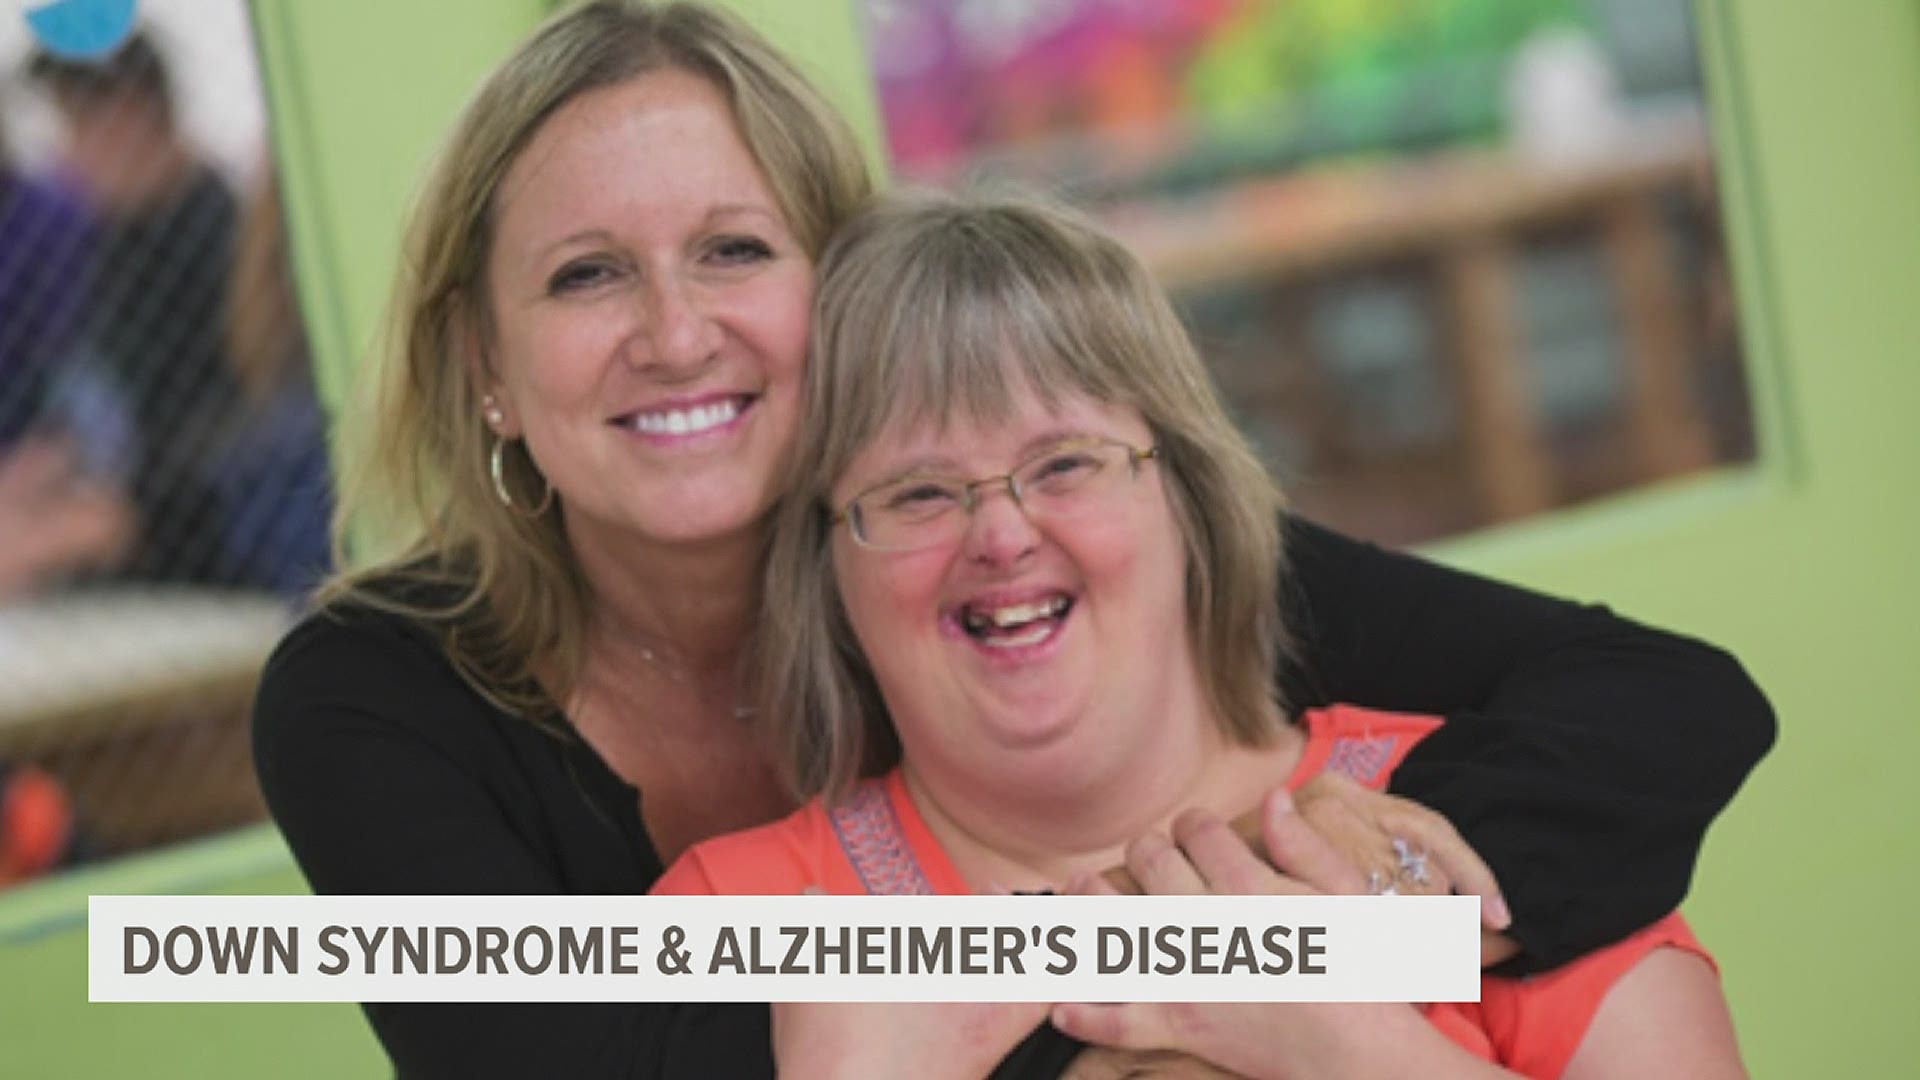 Roughly 50-percent of people with down syndrome will develop Alzheimer's disease. All month long, a local organization has been raising awareness.